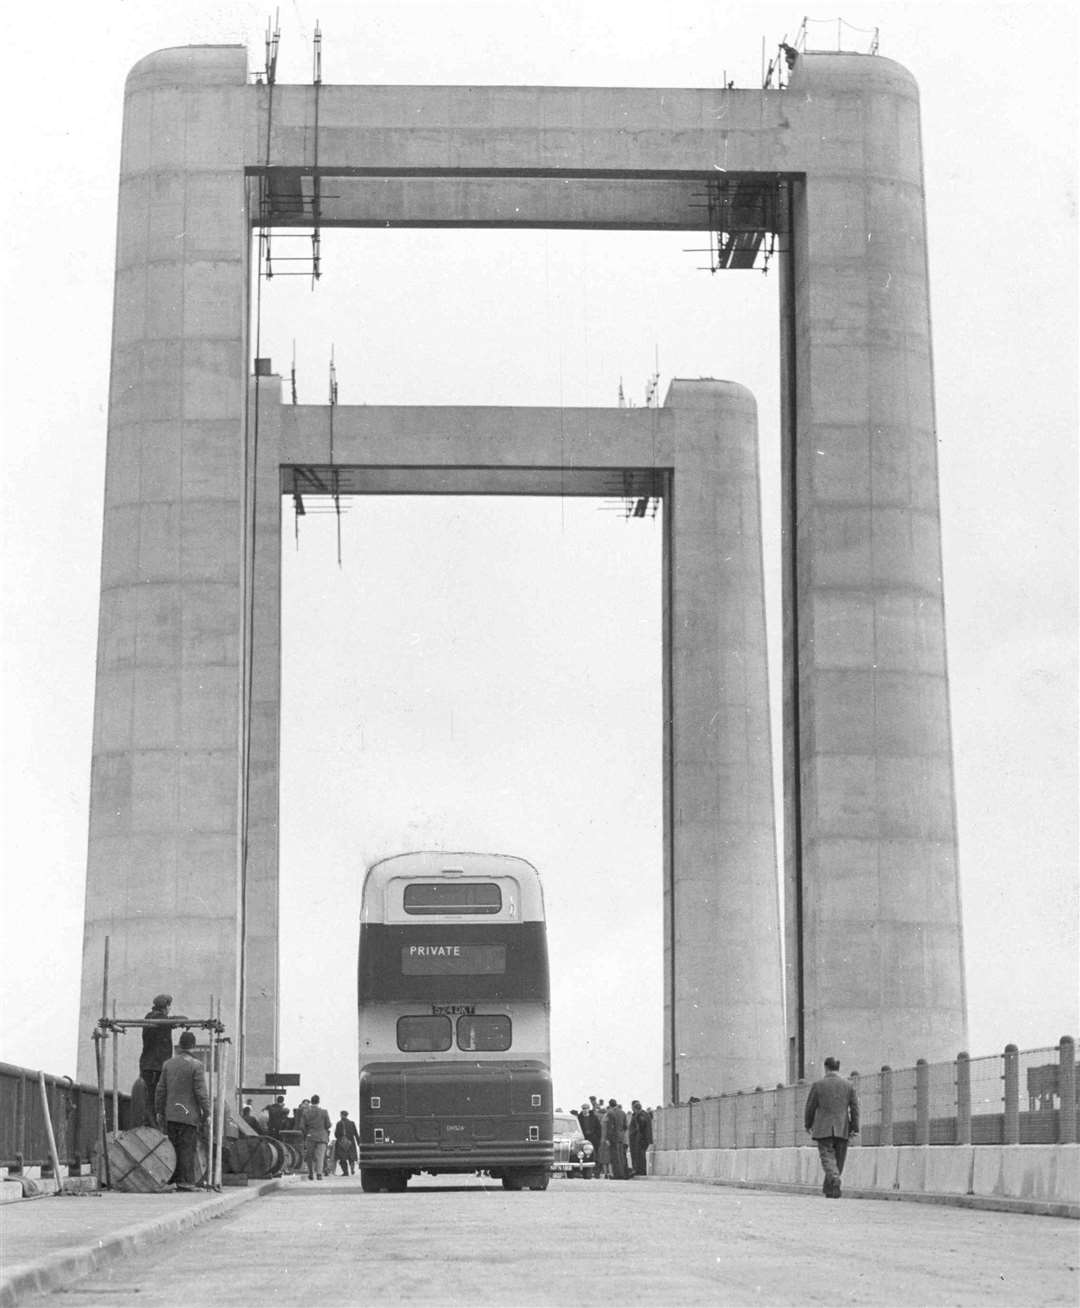 The new Kingsferry Bridge opened in April 1960, enabling buses to travel to and from the Isle of Sheppey for the first time